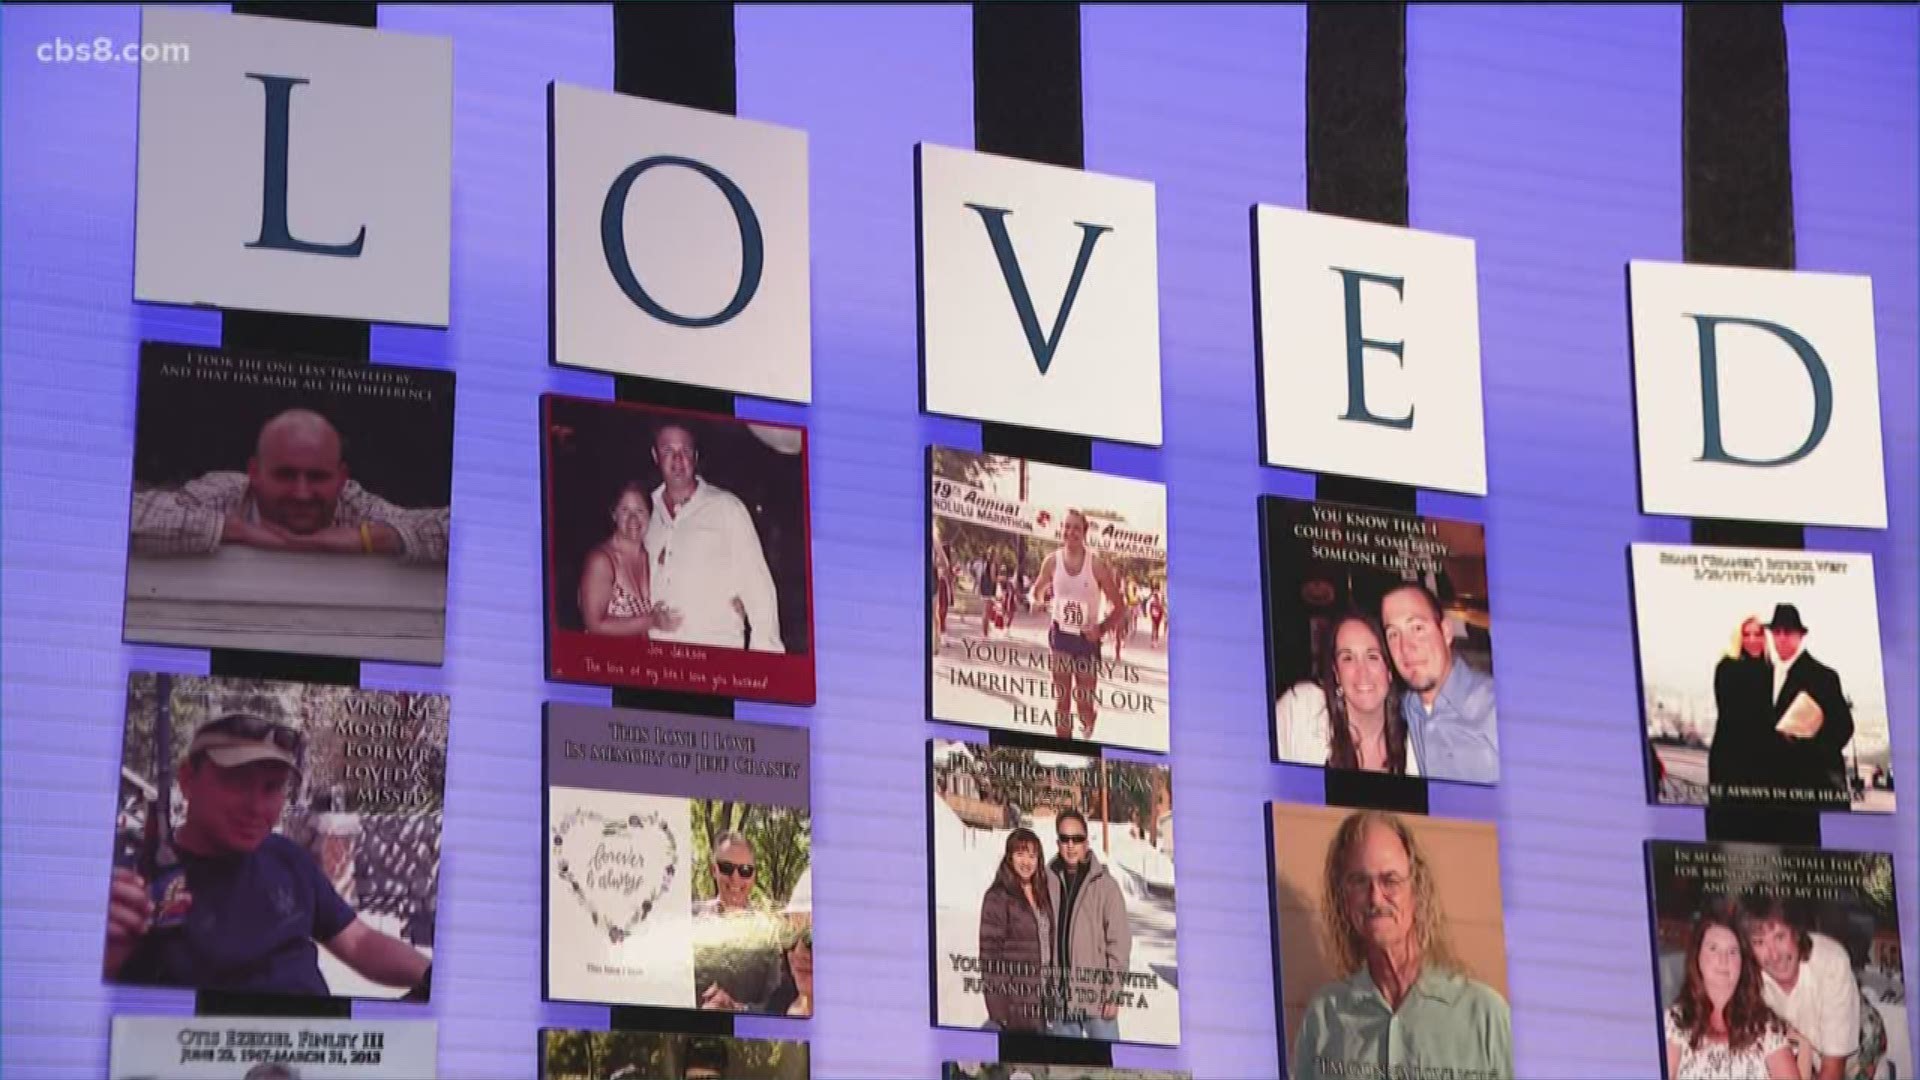 A unique camp designed for widows and widowers is taking place this weekend at the Marriott Marquis in downtown San Diego. Attendees come from different backgrounds with varying stories of loss, but every year, hundreds of widows and widowers from all over the world travel to San Diego to connect over their common feelings of grief.